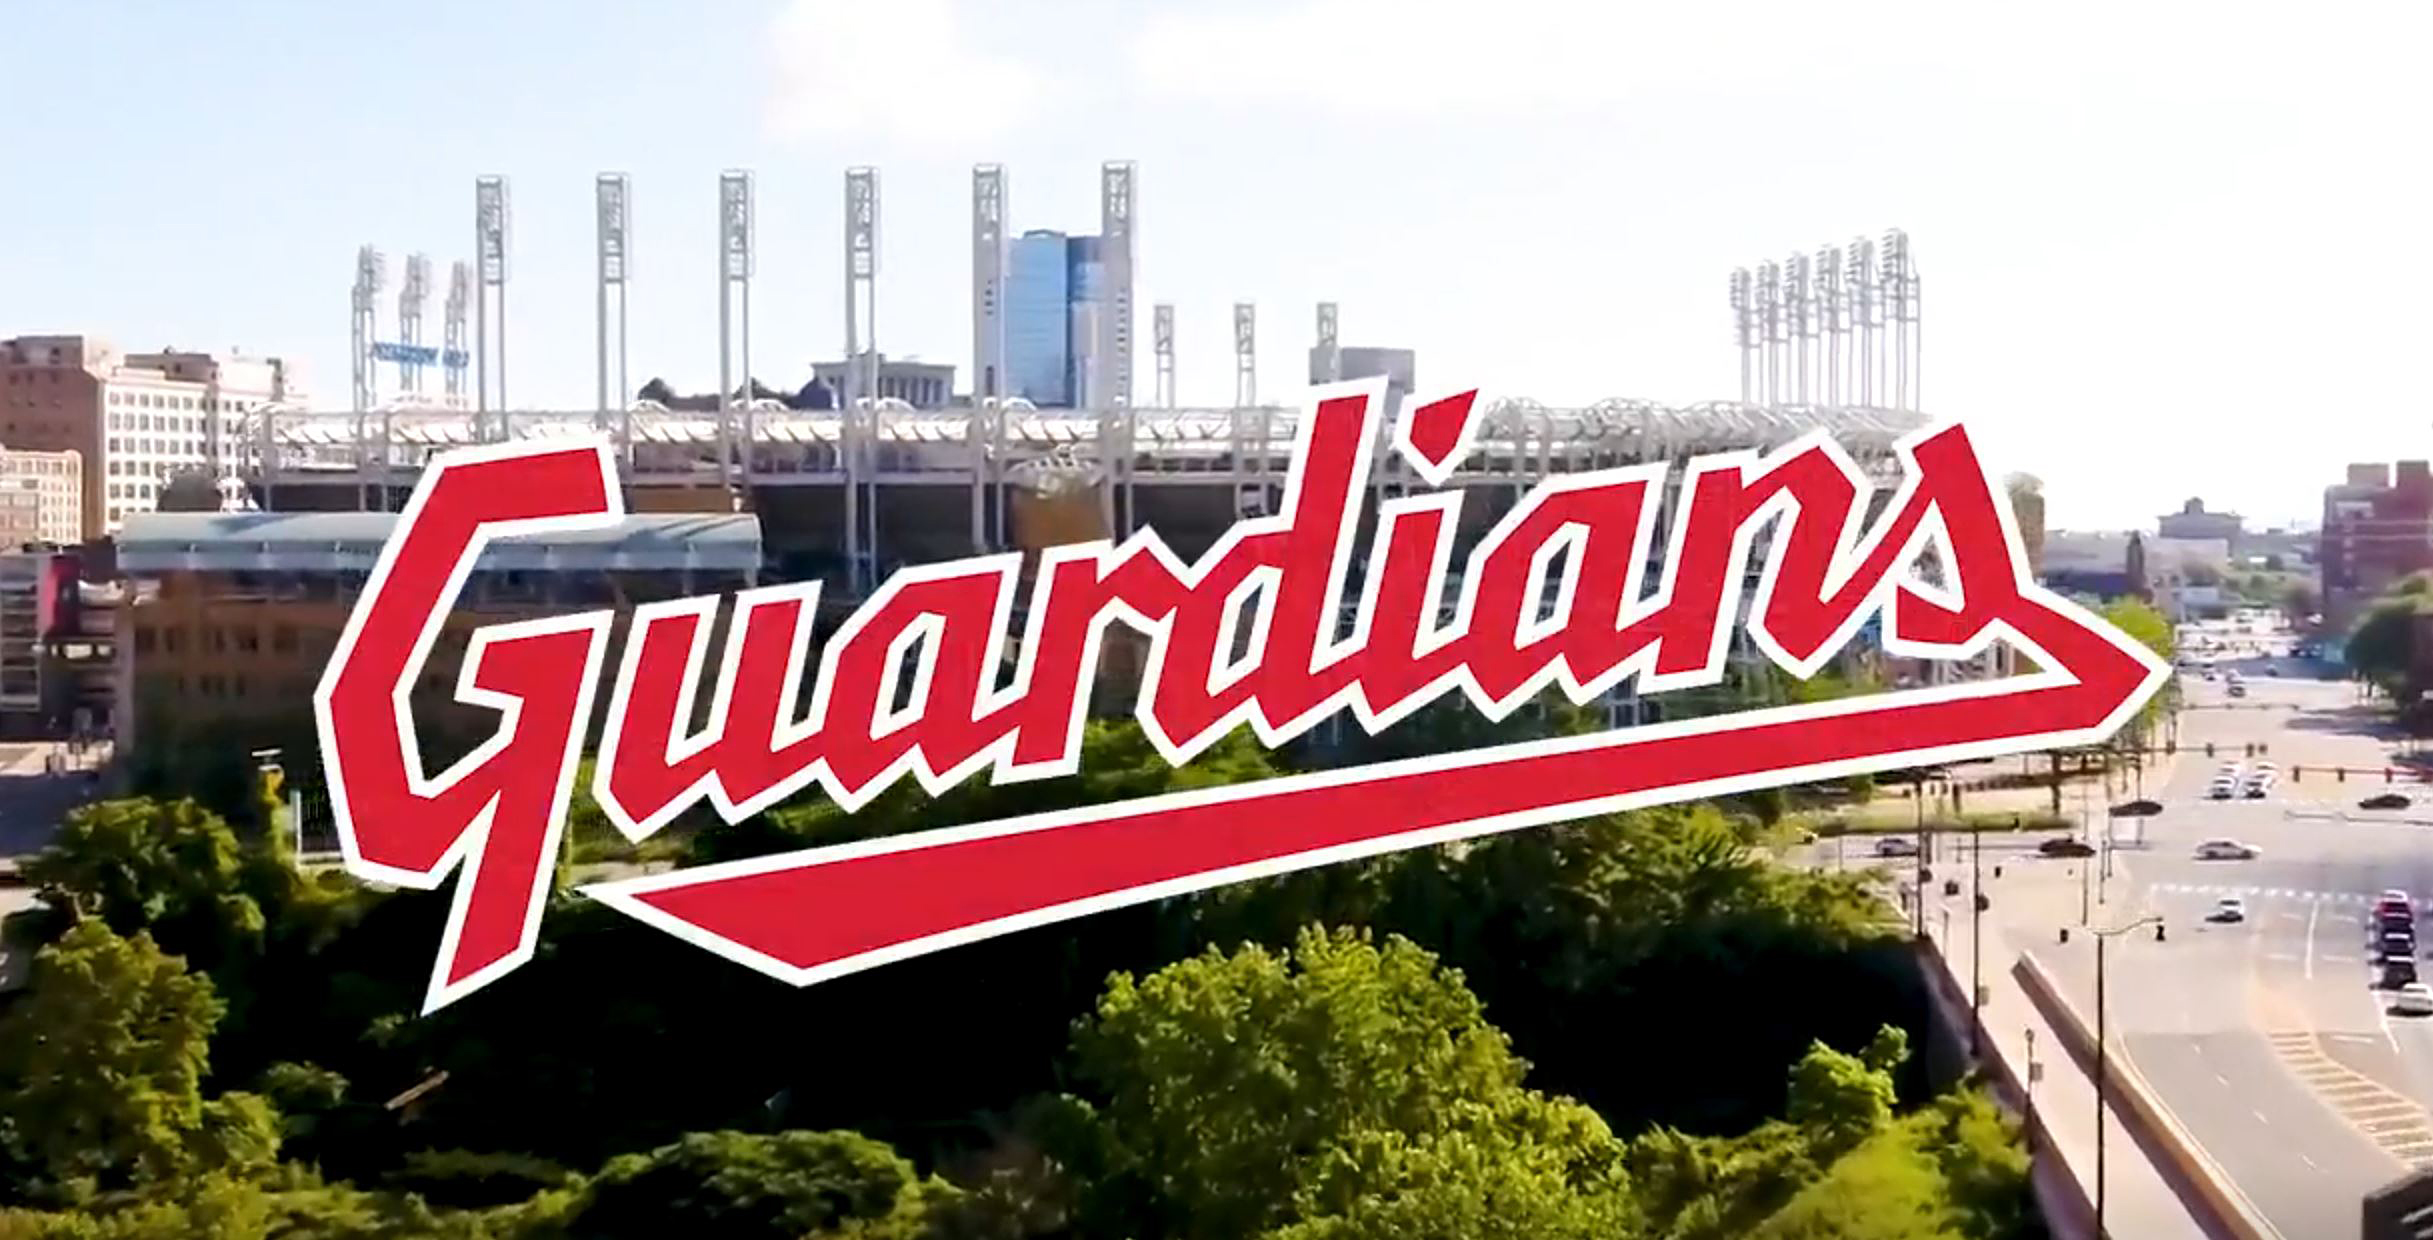 Do U.S. Trademark Office Rulings Give Early Insight Into Possible New Names  for Cleveland Indians?, Cleveland Sports, Cleveland